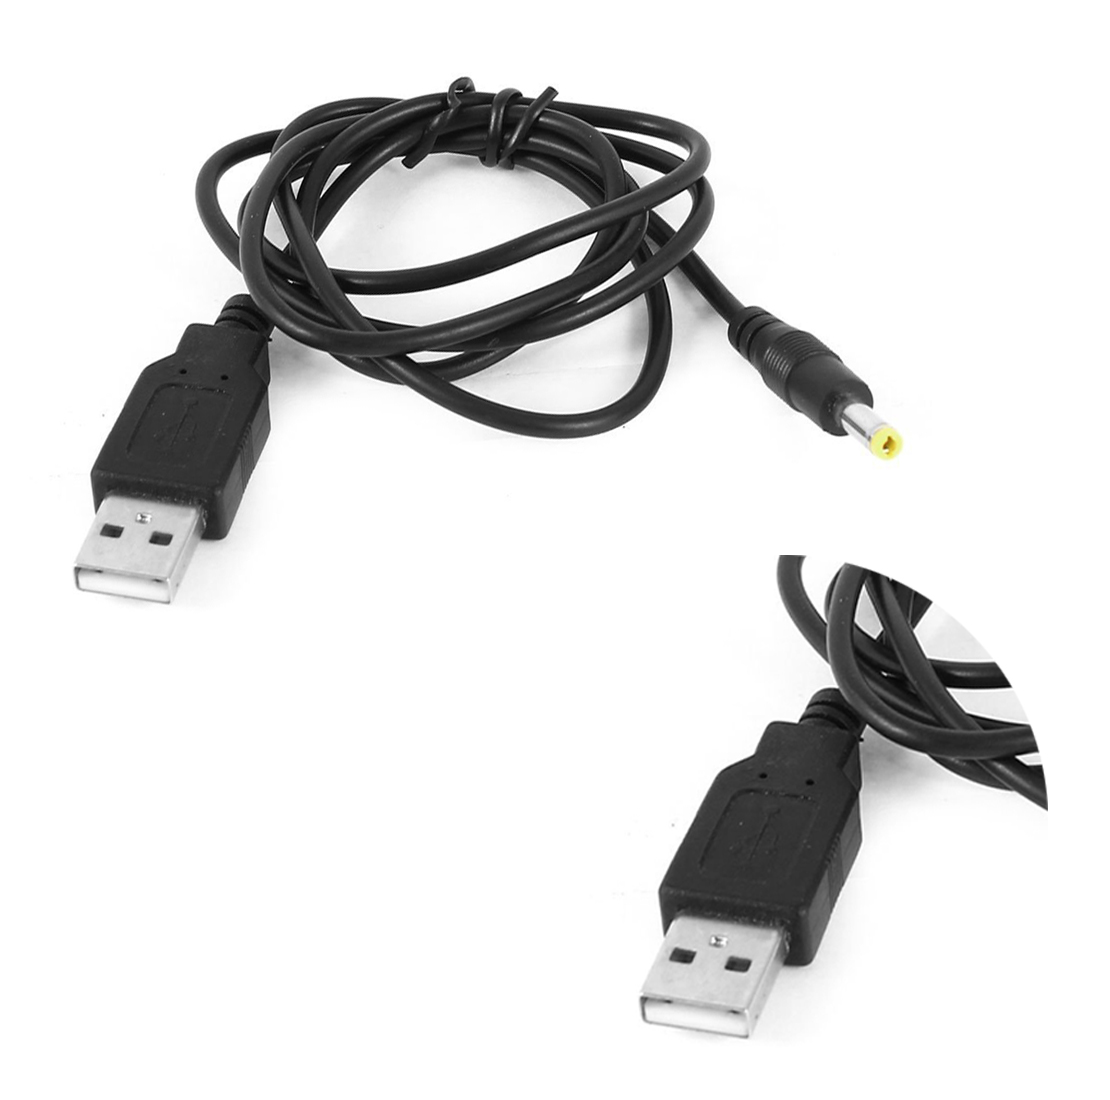 High Speed USB 2.0 A Male to DC 4.0mm x 1.7mm Power Cable 3Ft Black
